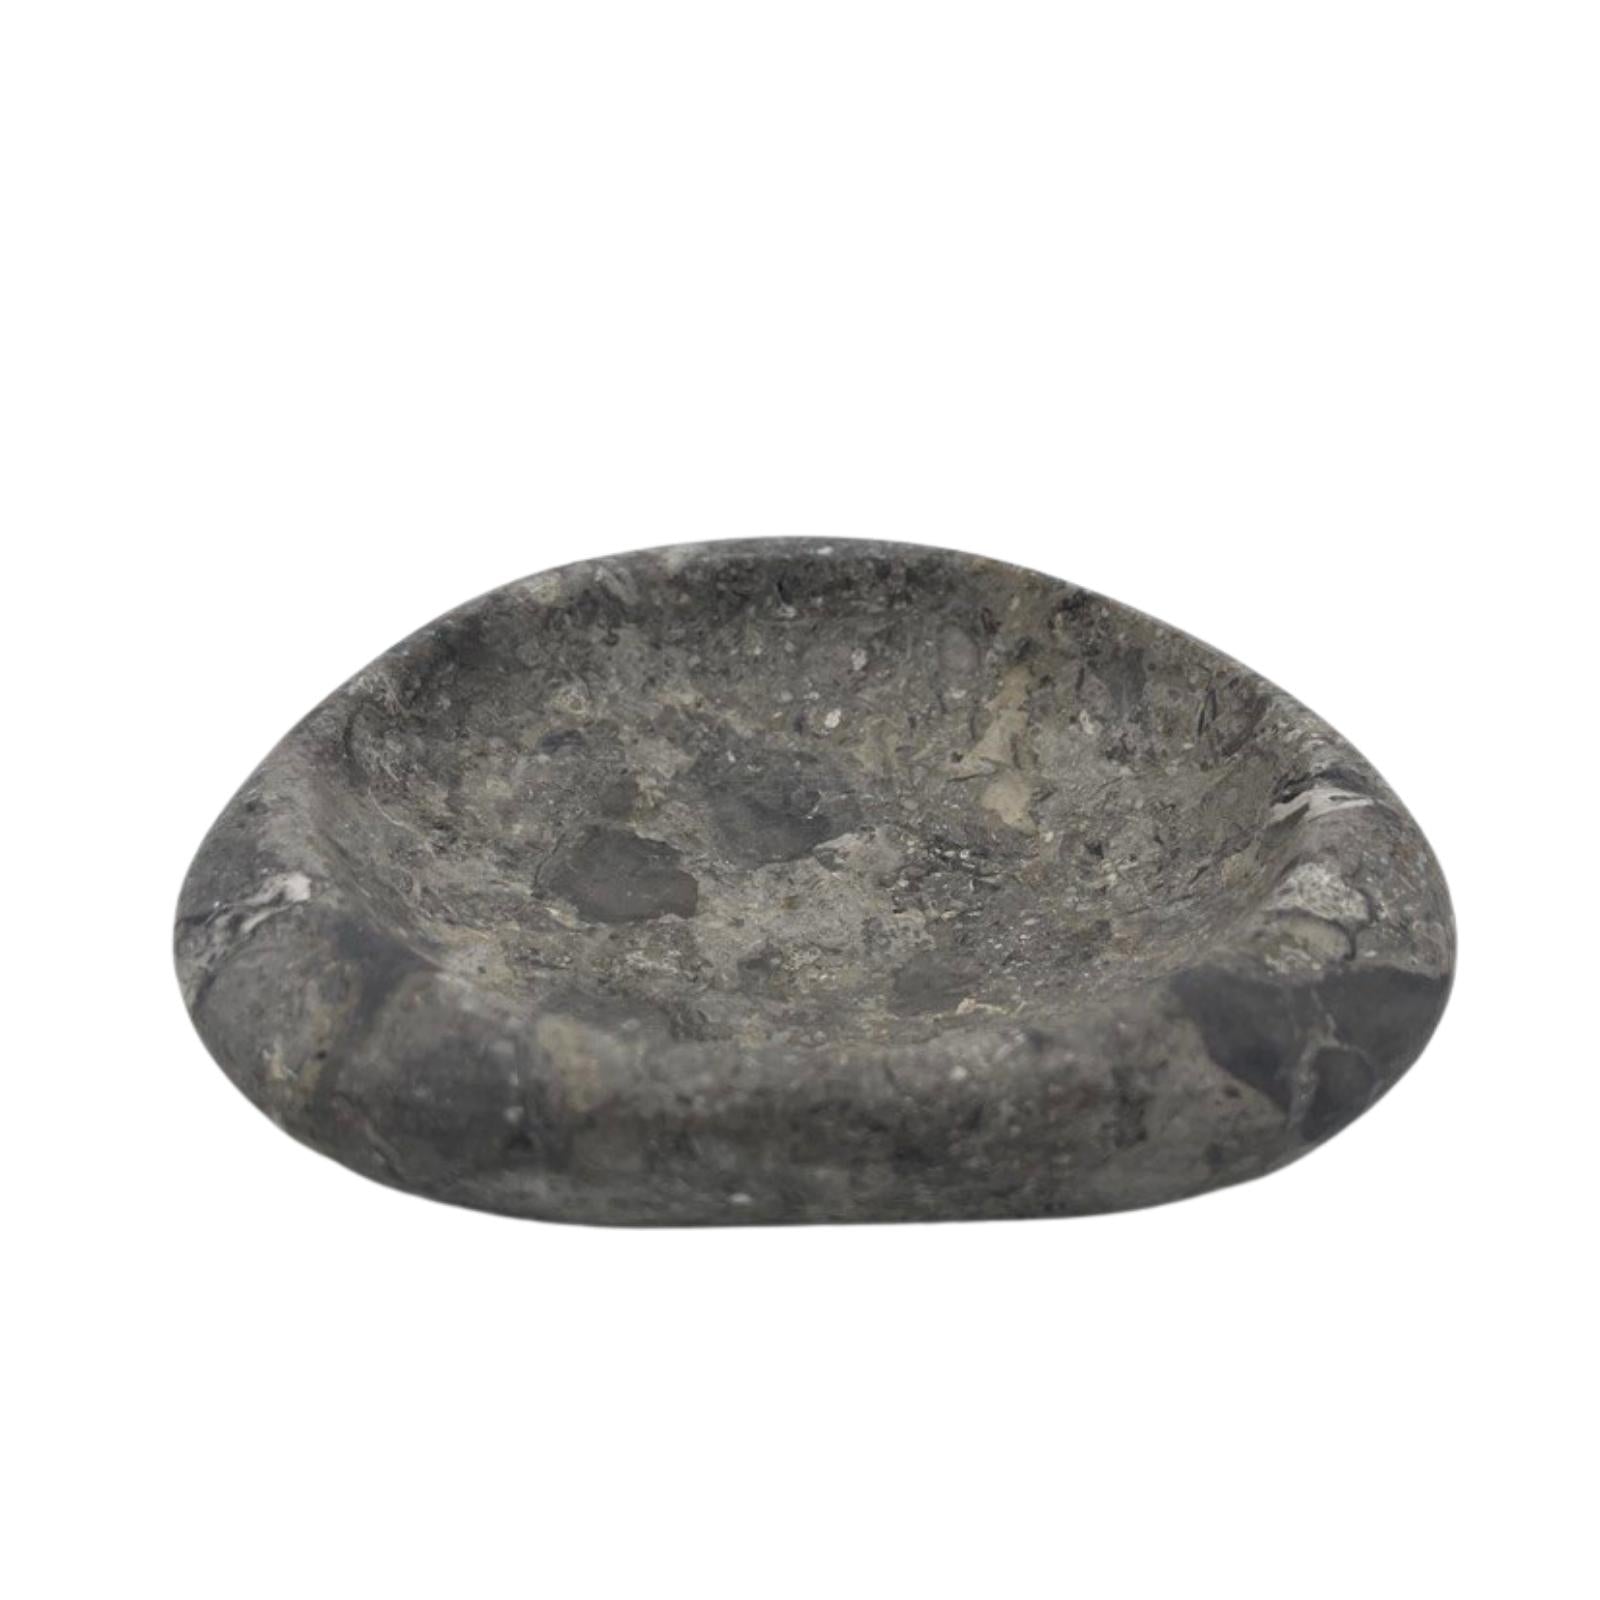 Tri-oval Marble Dish - £39.0 - 